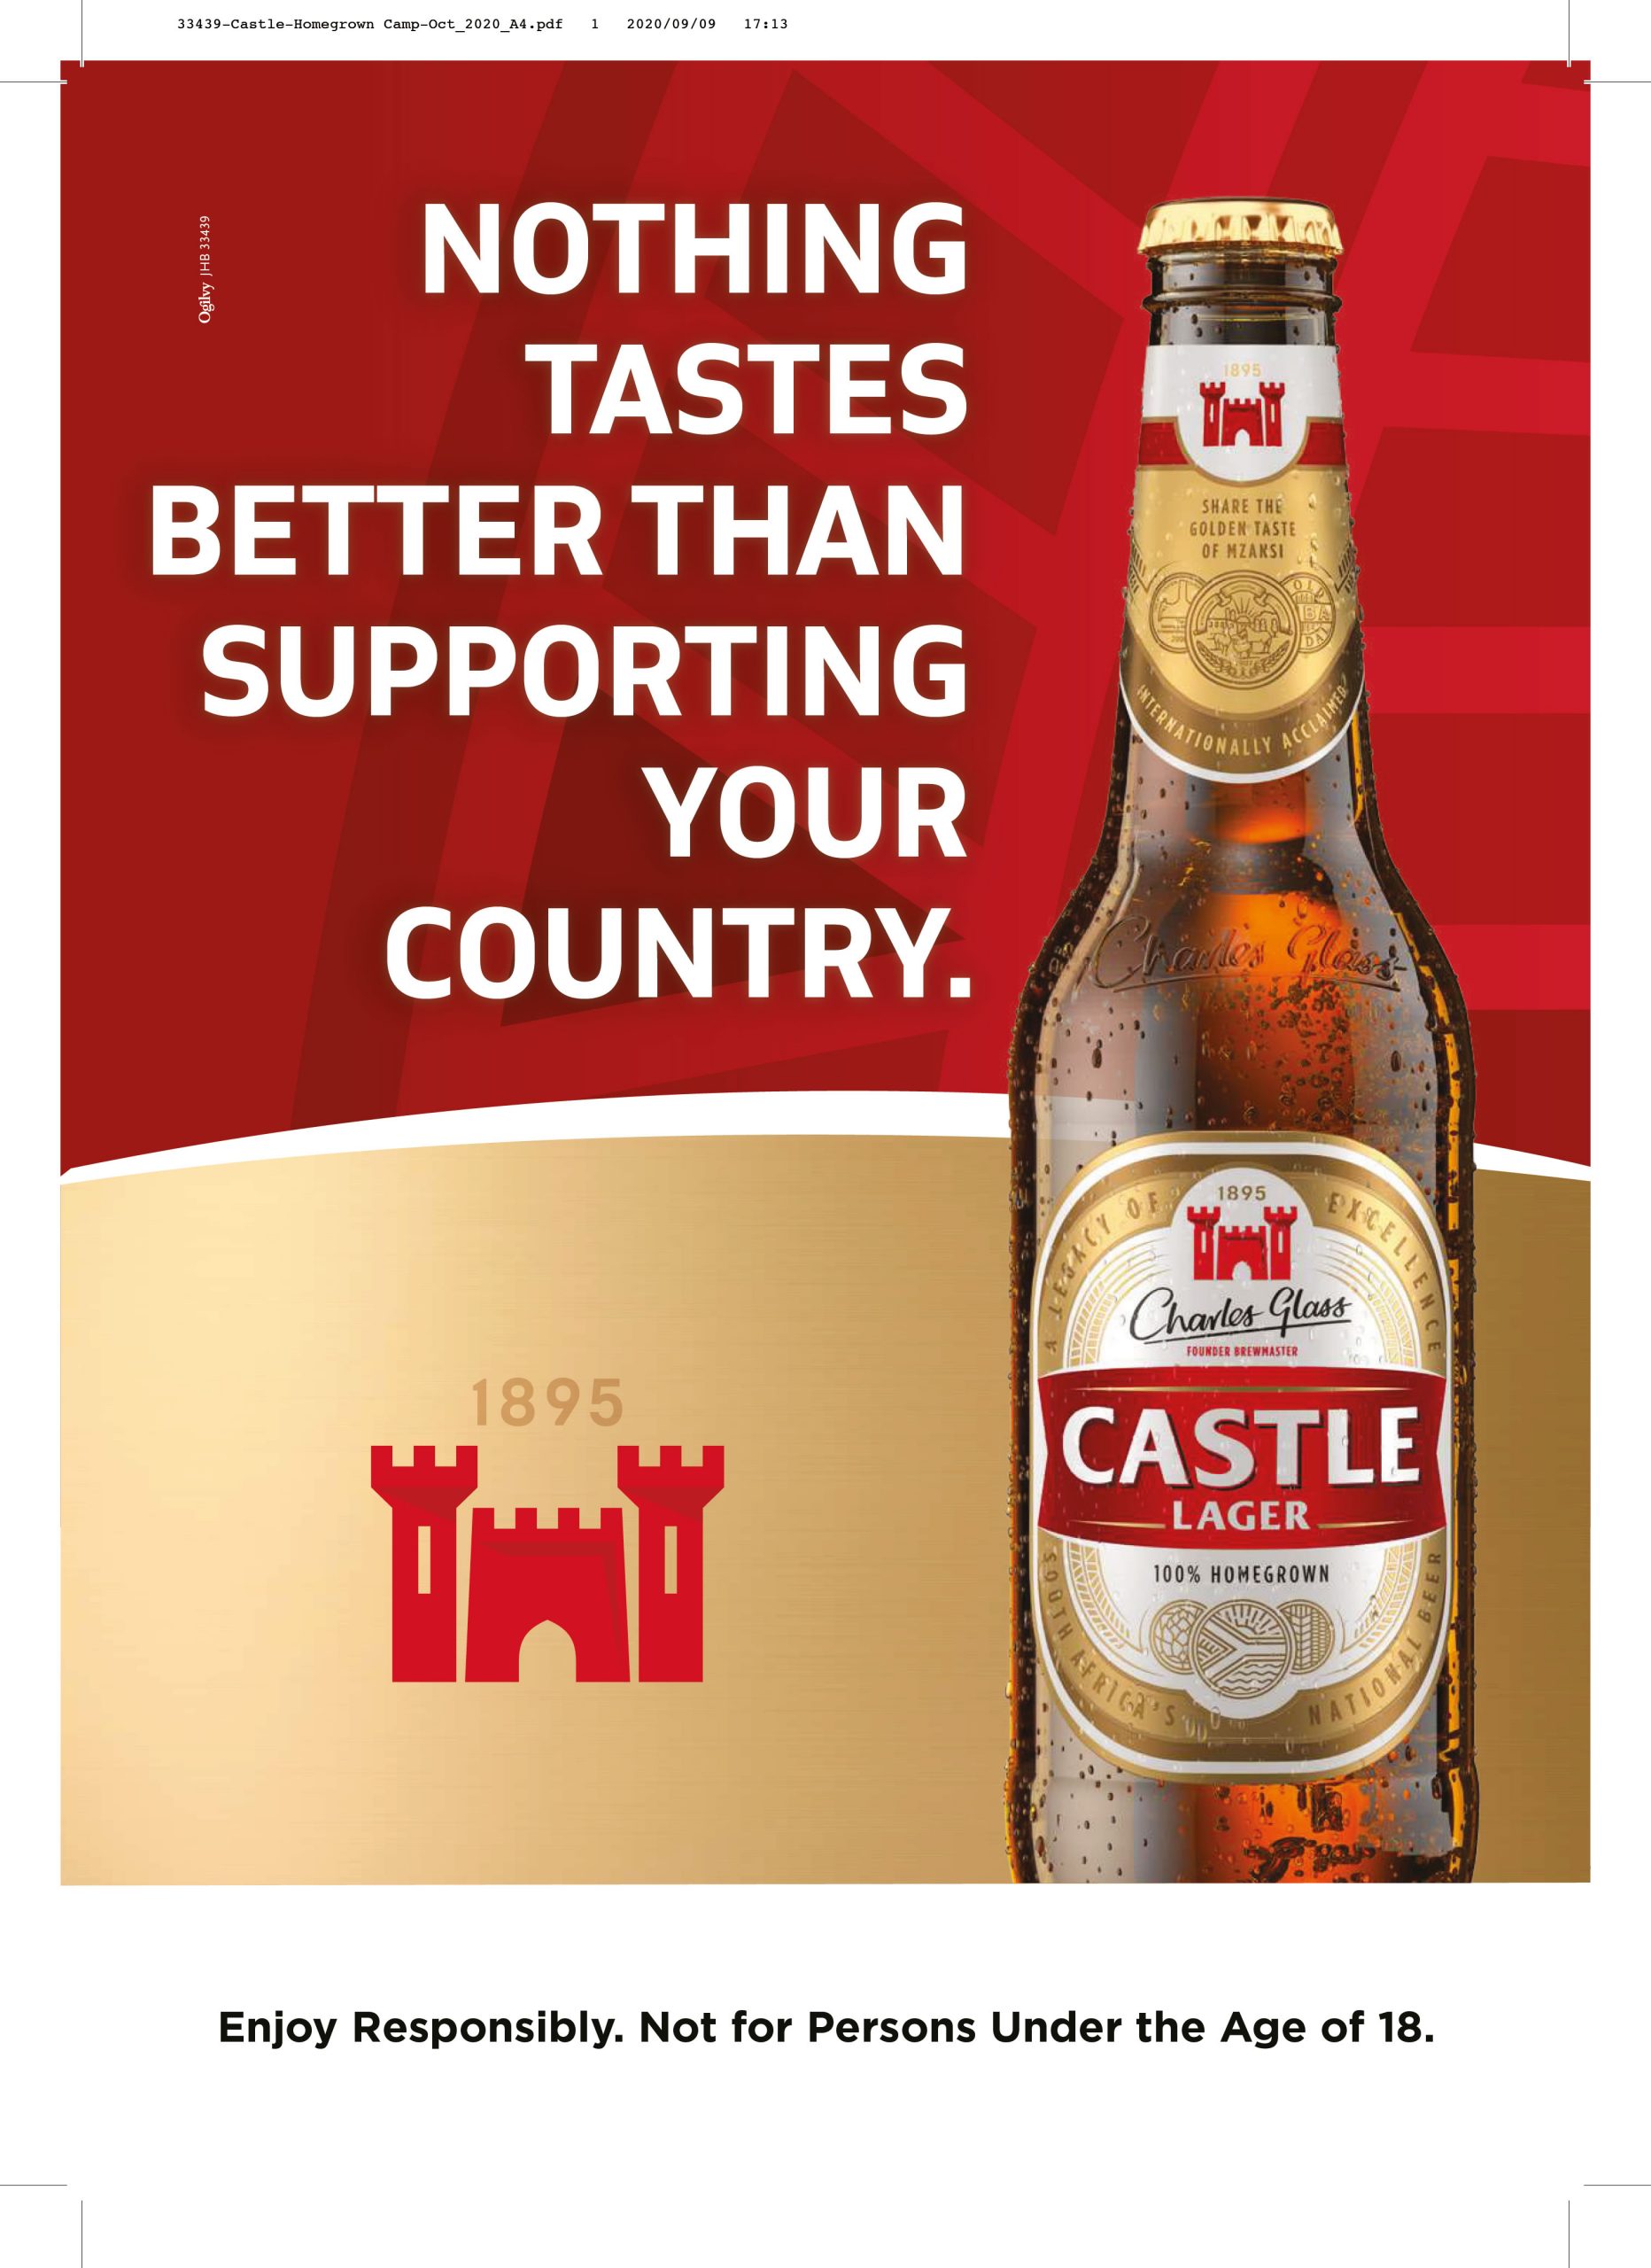 Castle Lager Celebrates 125 Years Of Homegrown Heritage With A Brand-new Look! photo